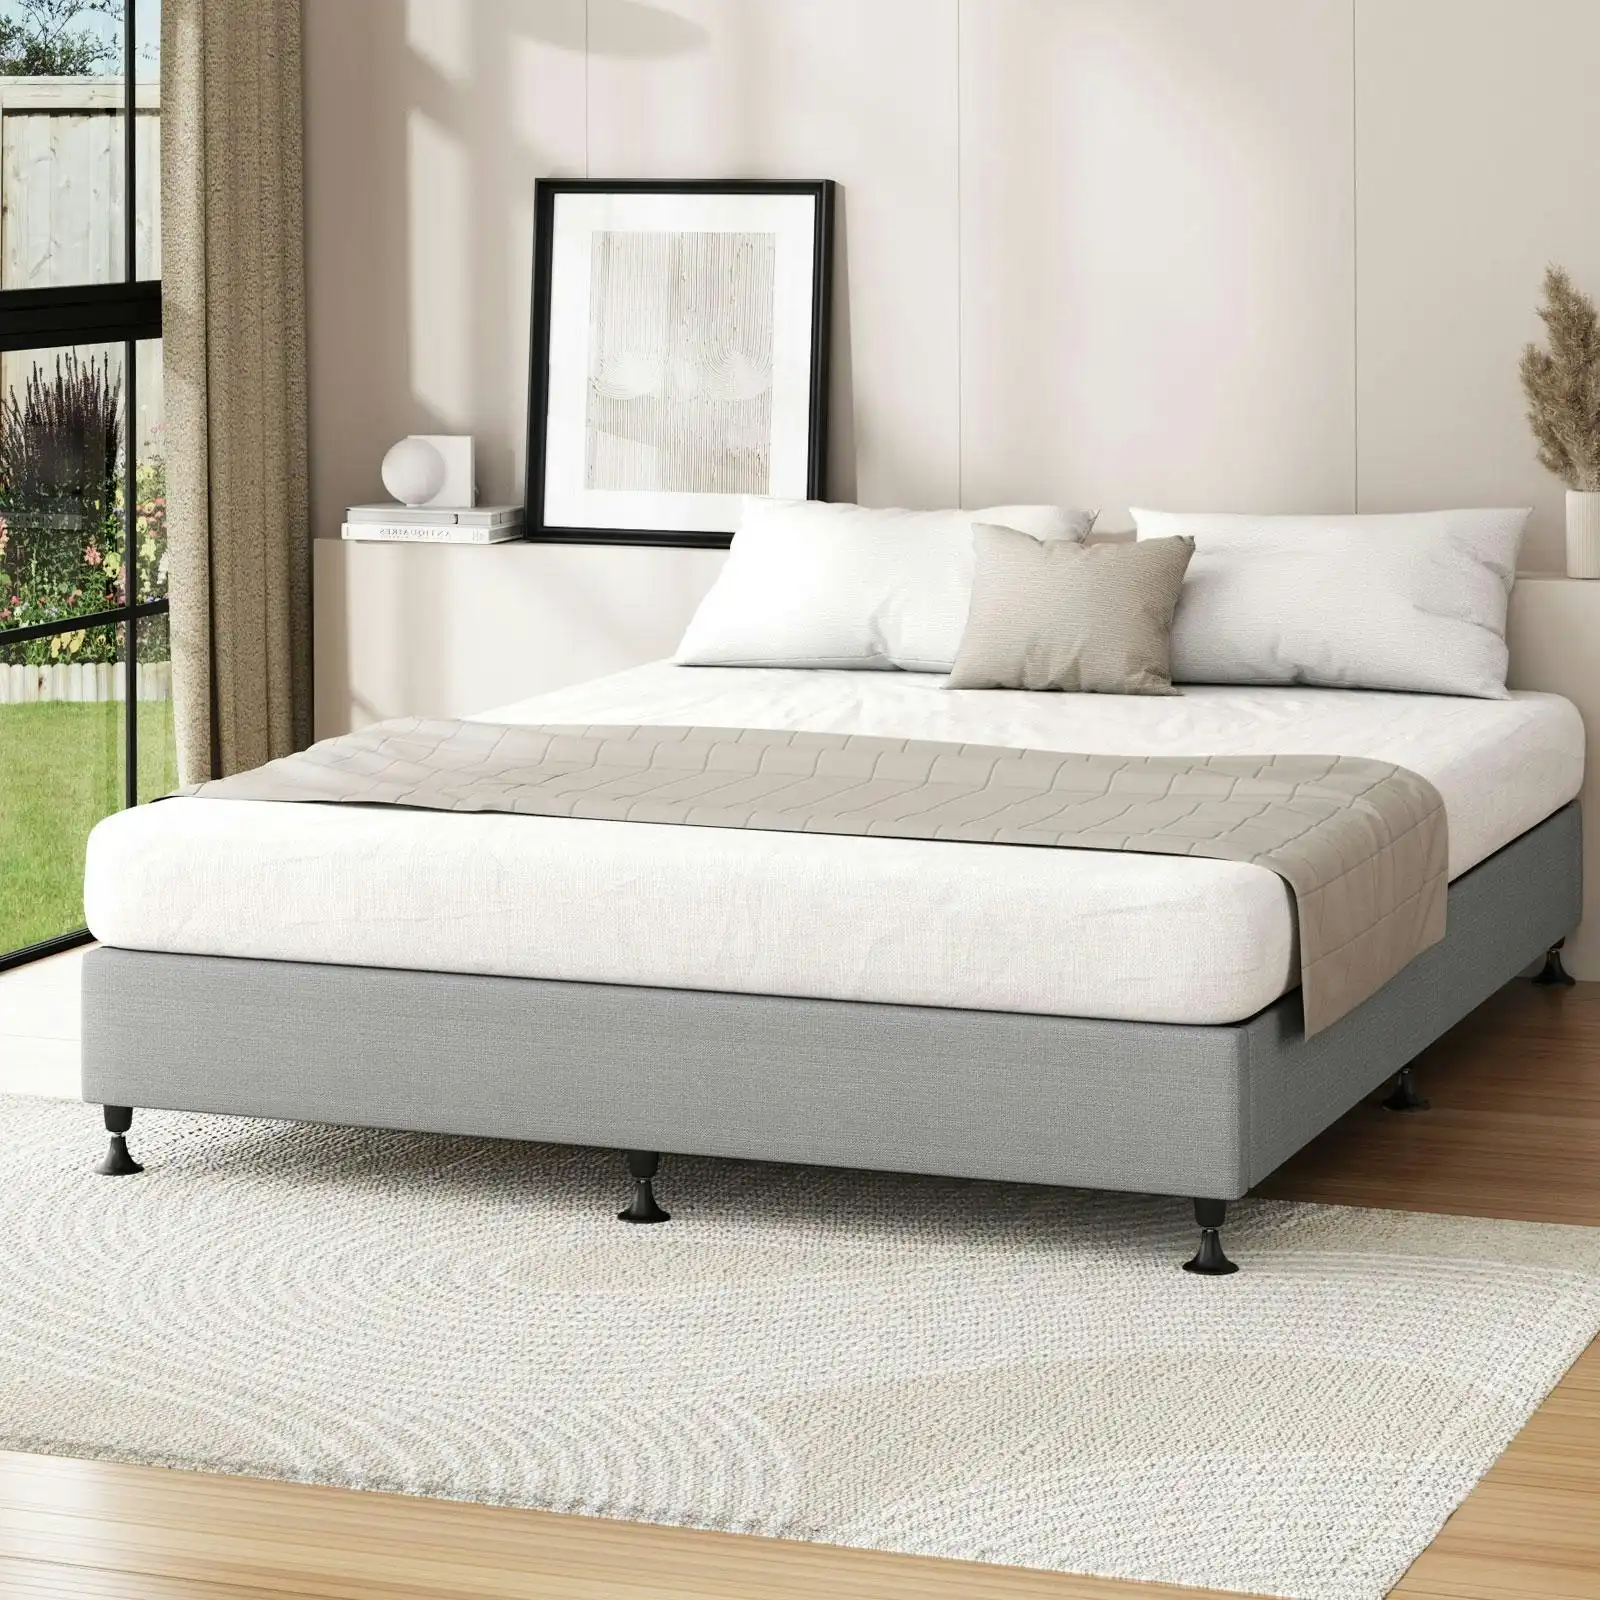 Oikiture Bed Frame Double Size Bed Base Platform Grey